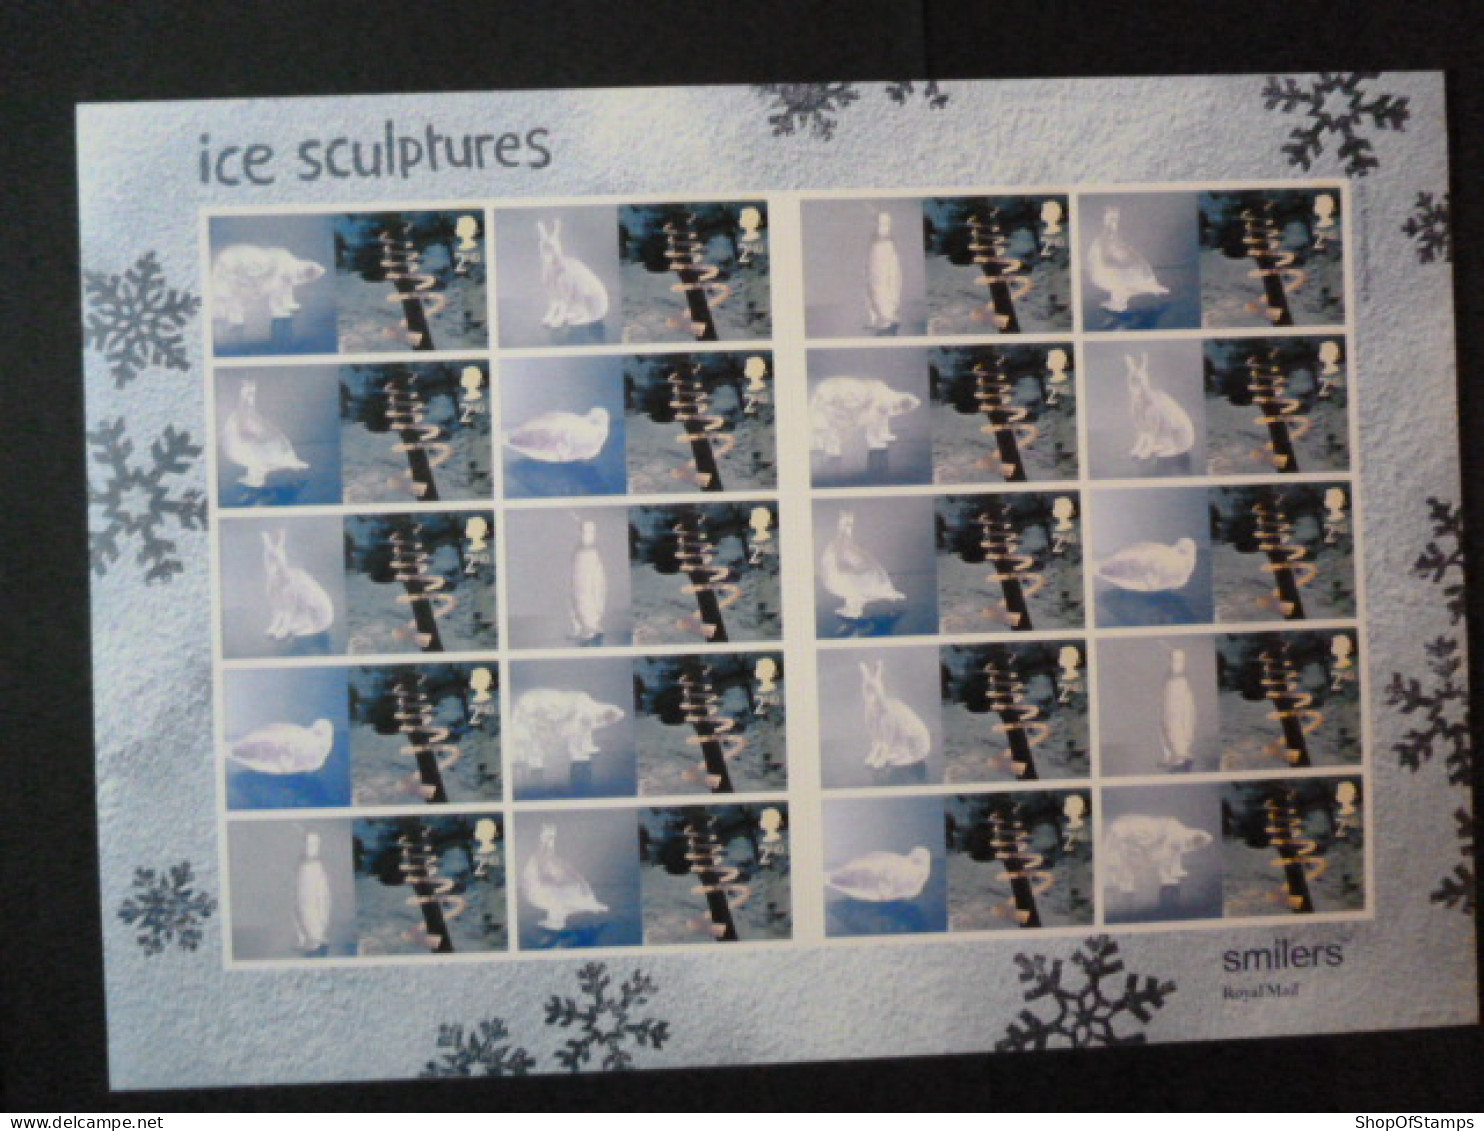 GREAT BRITAIN SG 2410 CHRISTMAS ICE SCULPTURES 20 STAMPS SMILER SHEET WITH GUTTERS & LABELS - Feuilles, Planches  Et Multiples